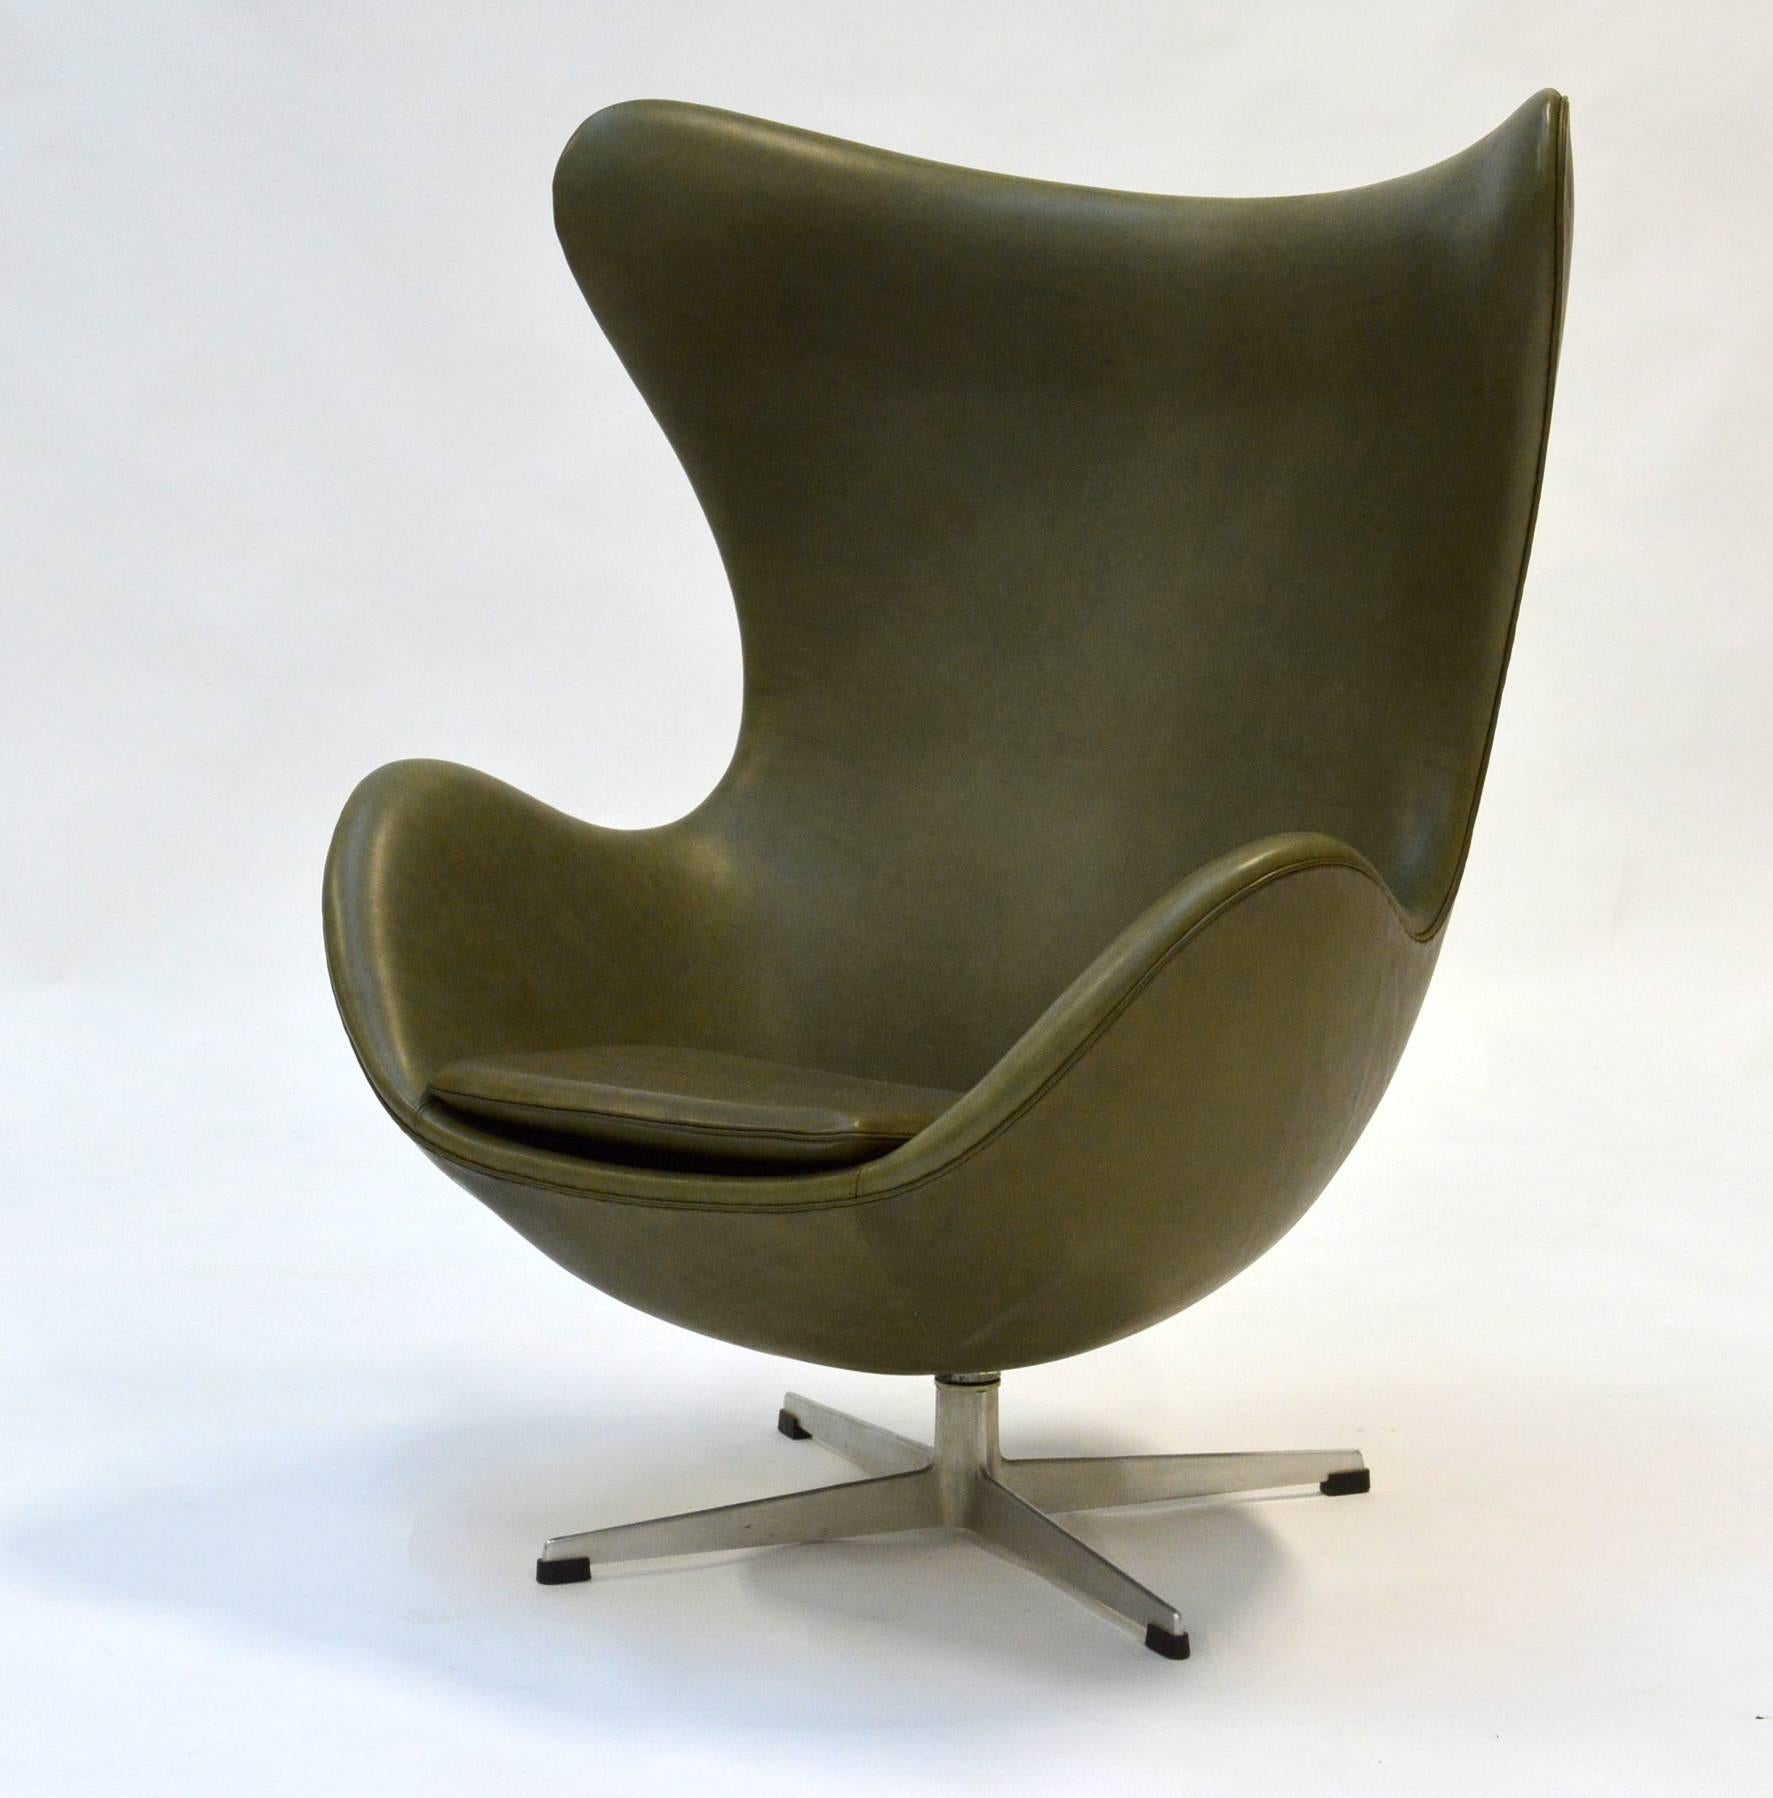 Egg lounge chair by Arne Jacobsen, Fritz Hansen, leather
This egg chair is in excellent condition. The armchair has been reupholstered by a Danish restorer, who exclusively restored furniture by Fritz Hansen.
Incl. Label and no. 1263 (see